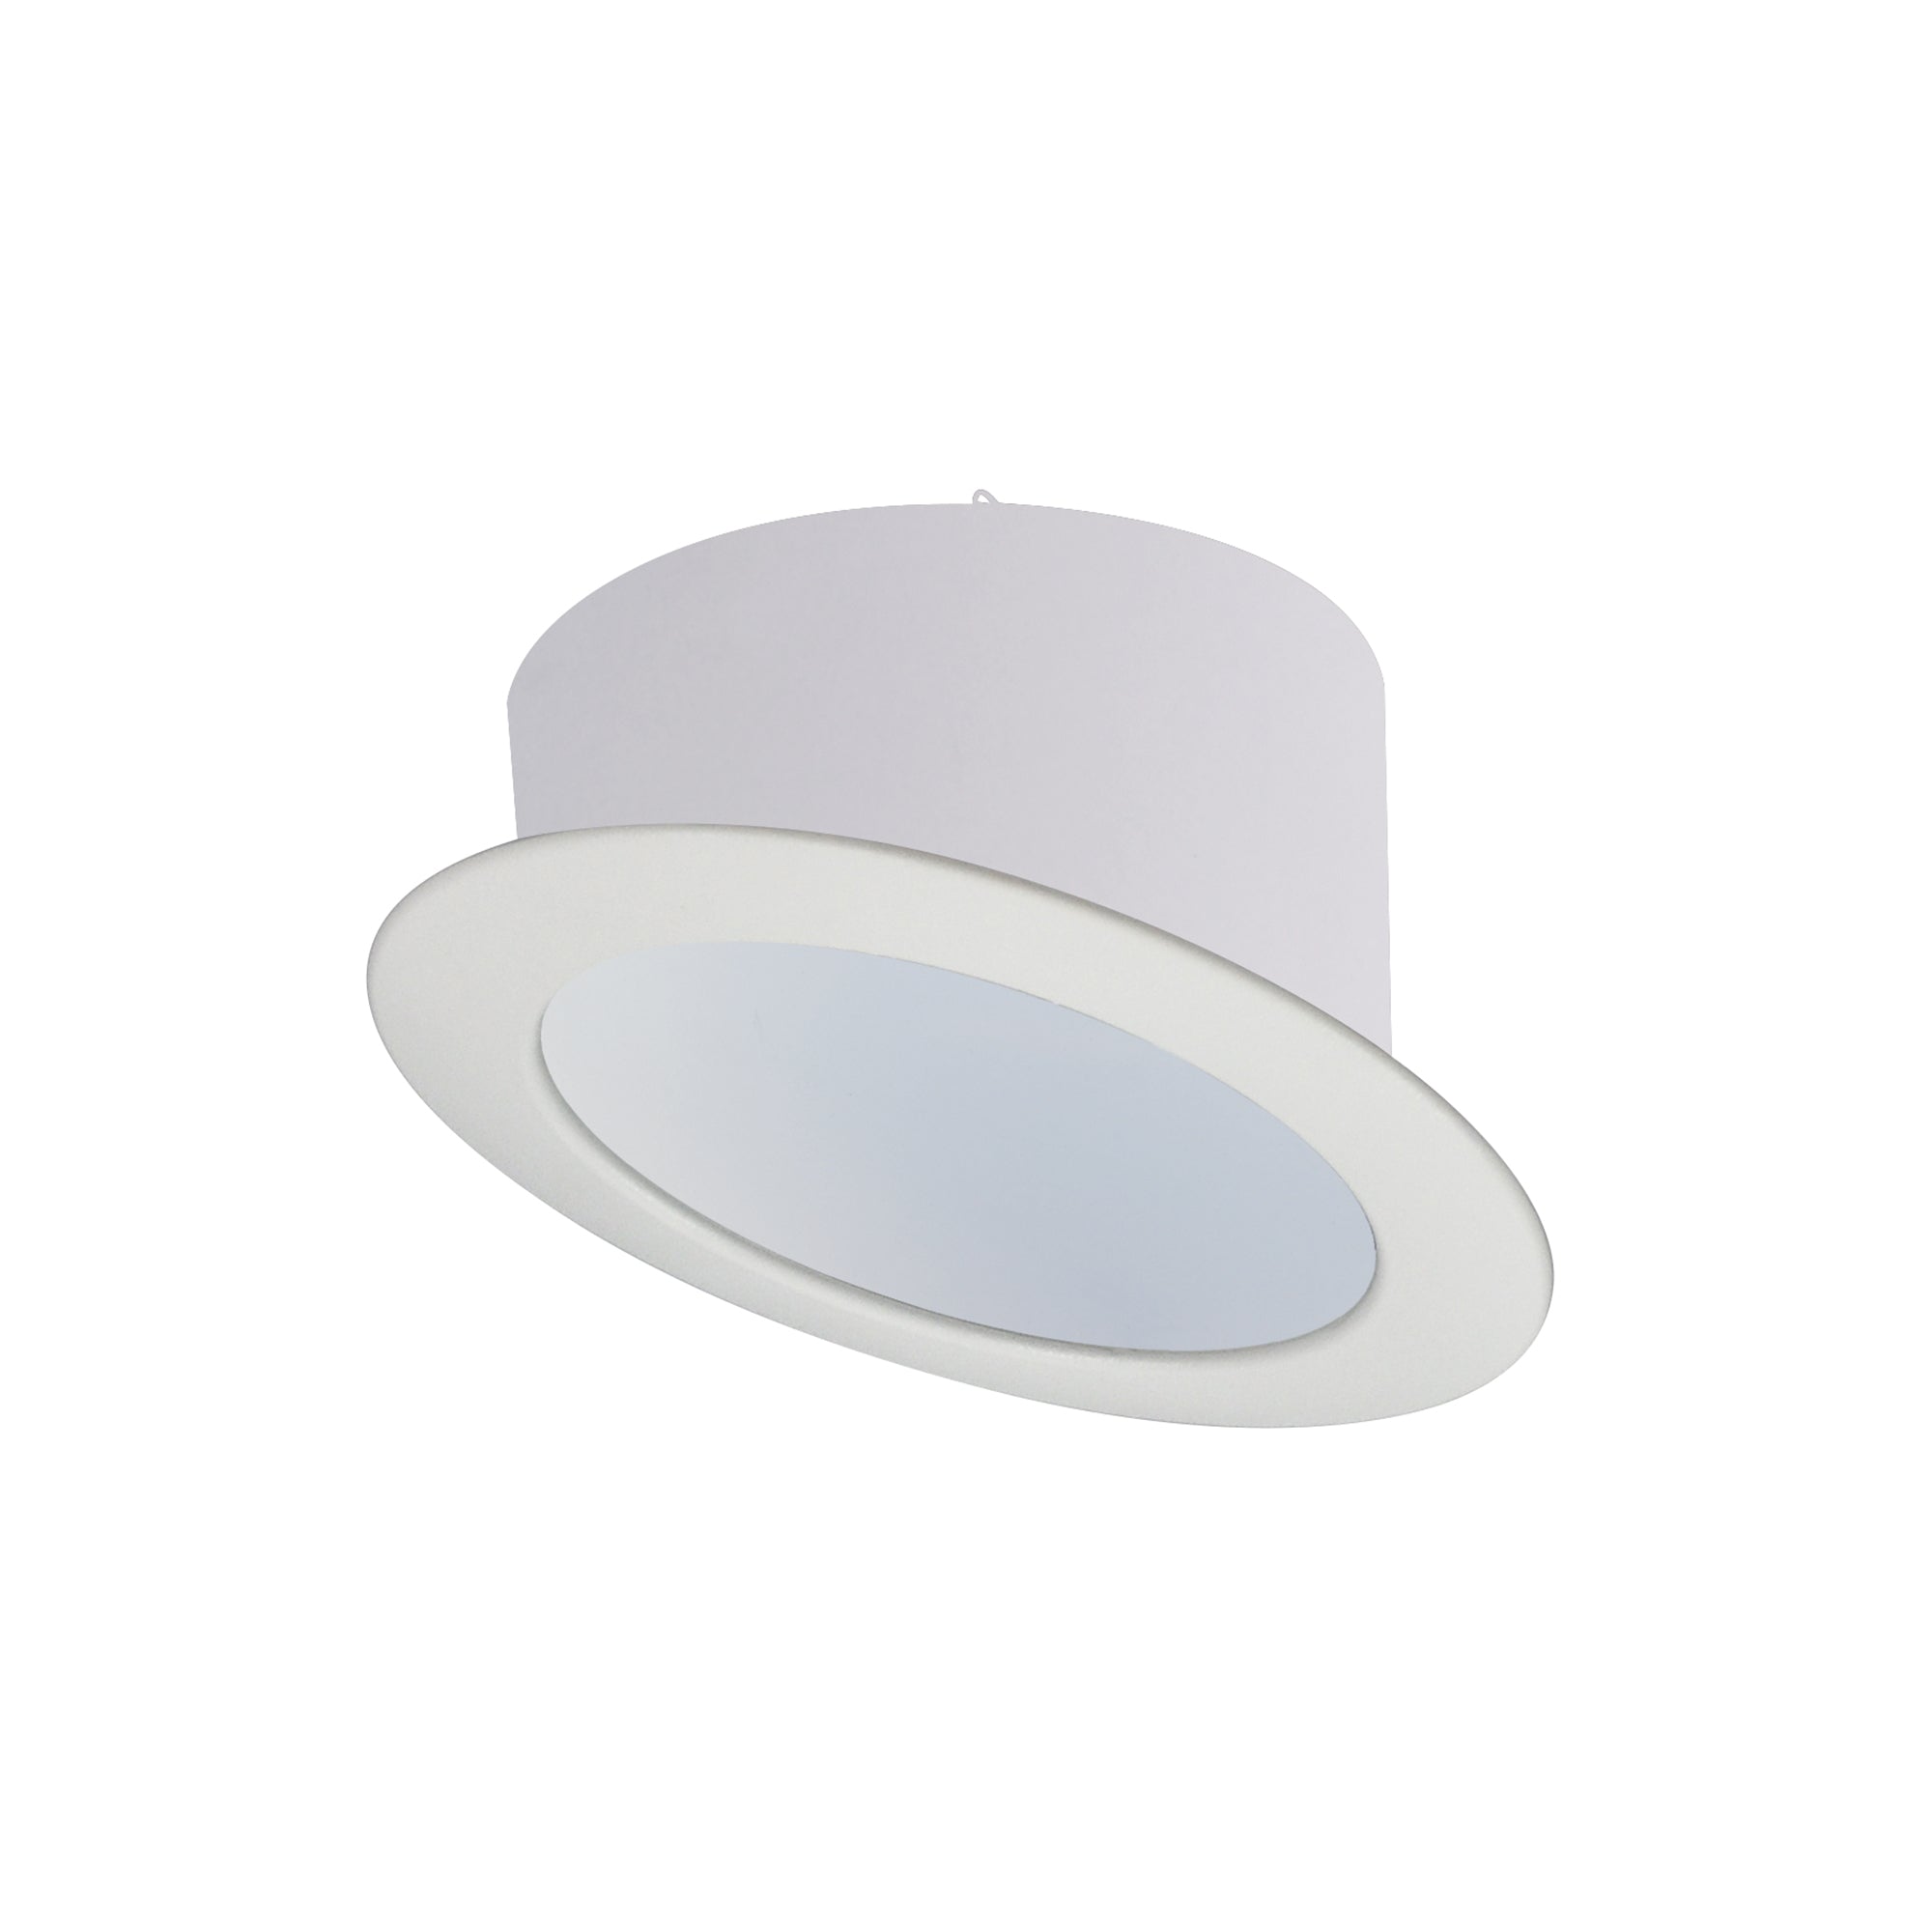 Nora Lighting NTS-615W - Recessed - 6 Inch Sloped Metal Reflector Trim, White/White